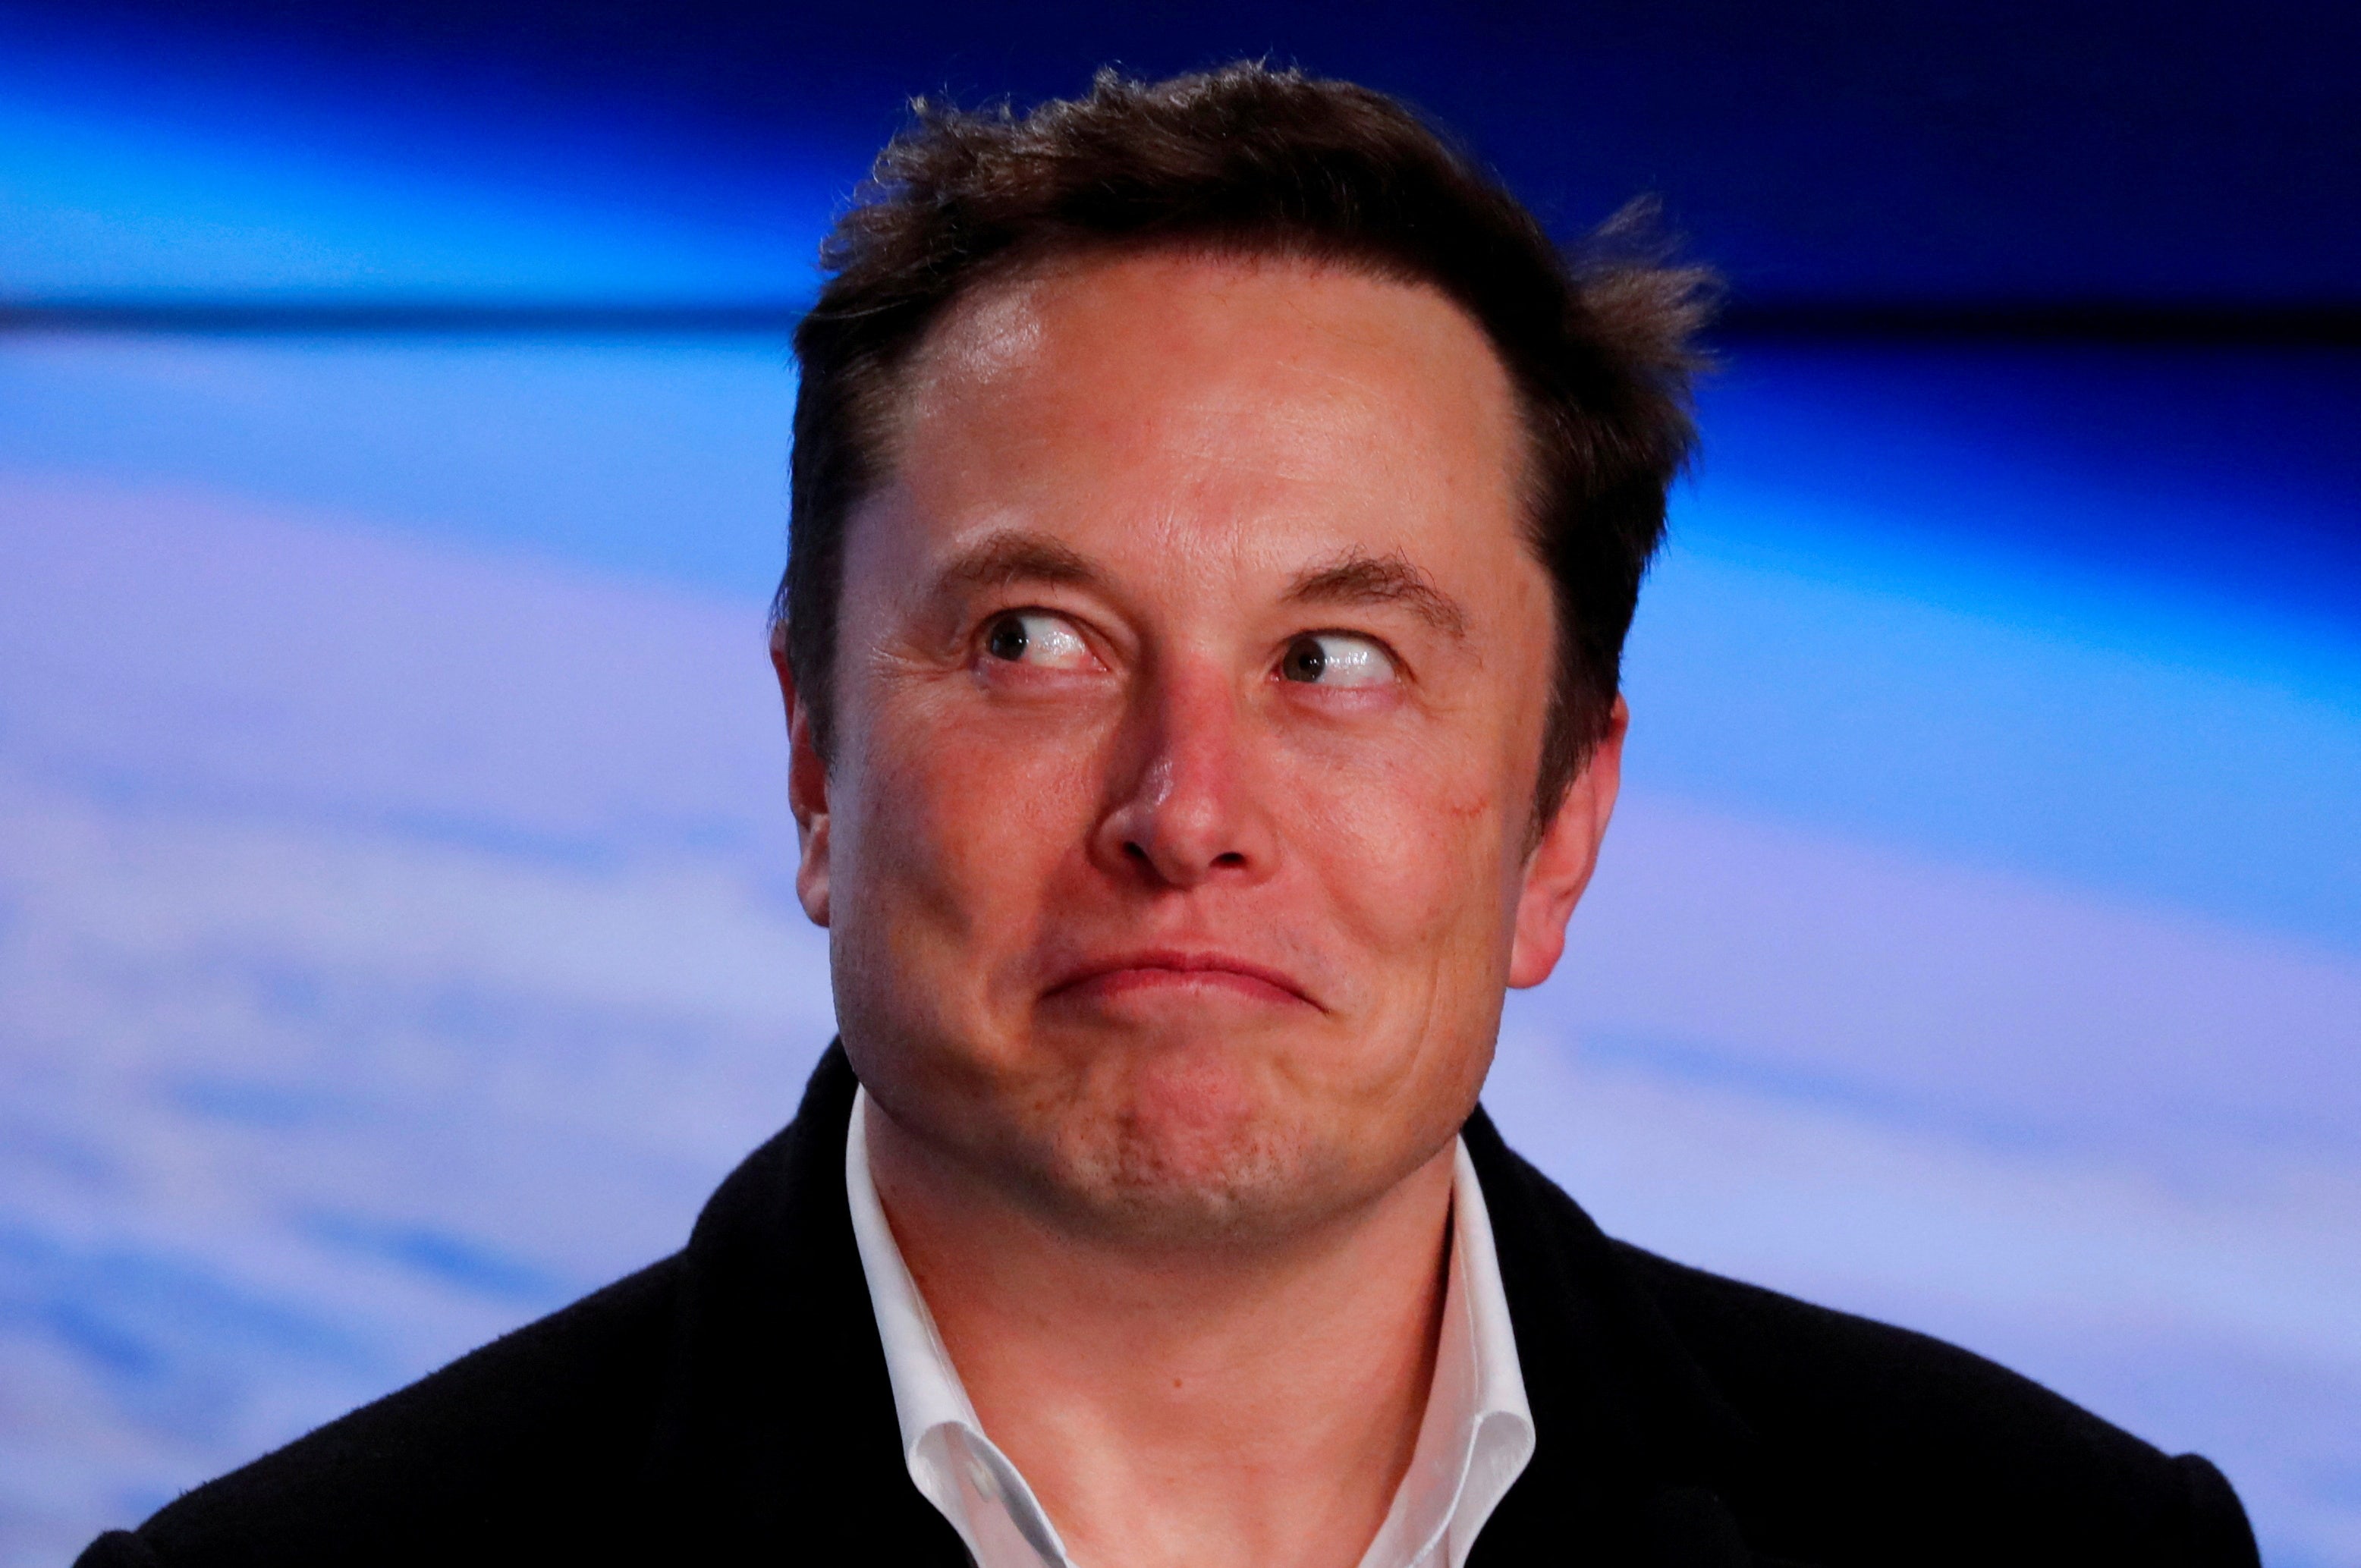 Substack VP warns Twitter employees quitting over Elon Musk: ‘Please do not come work here’